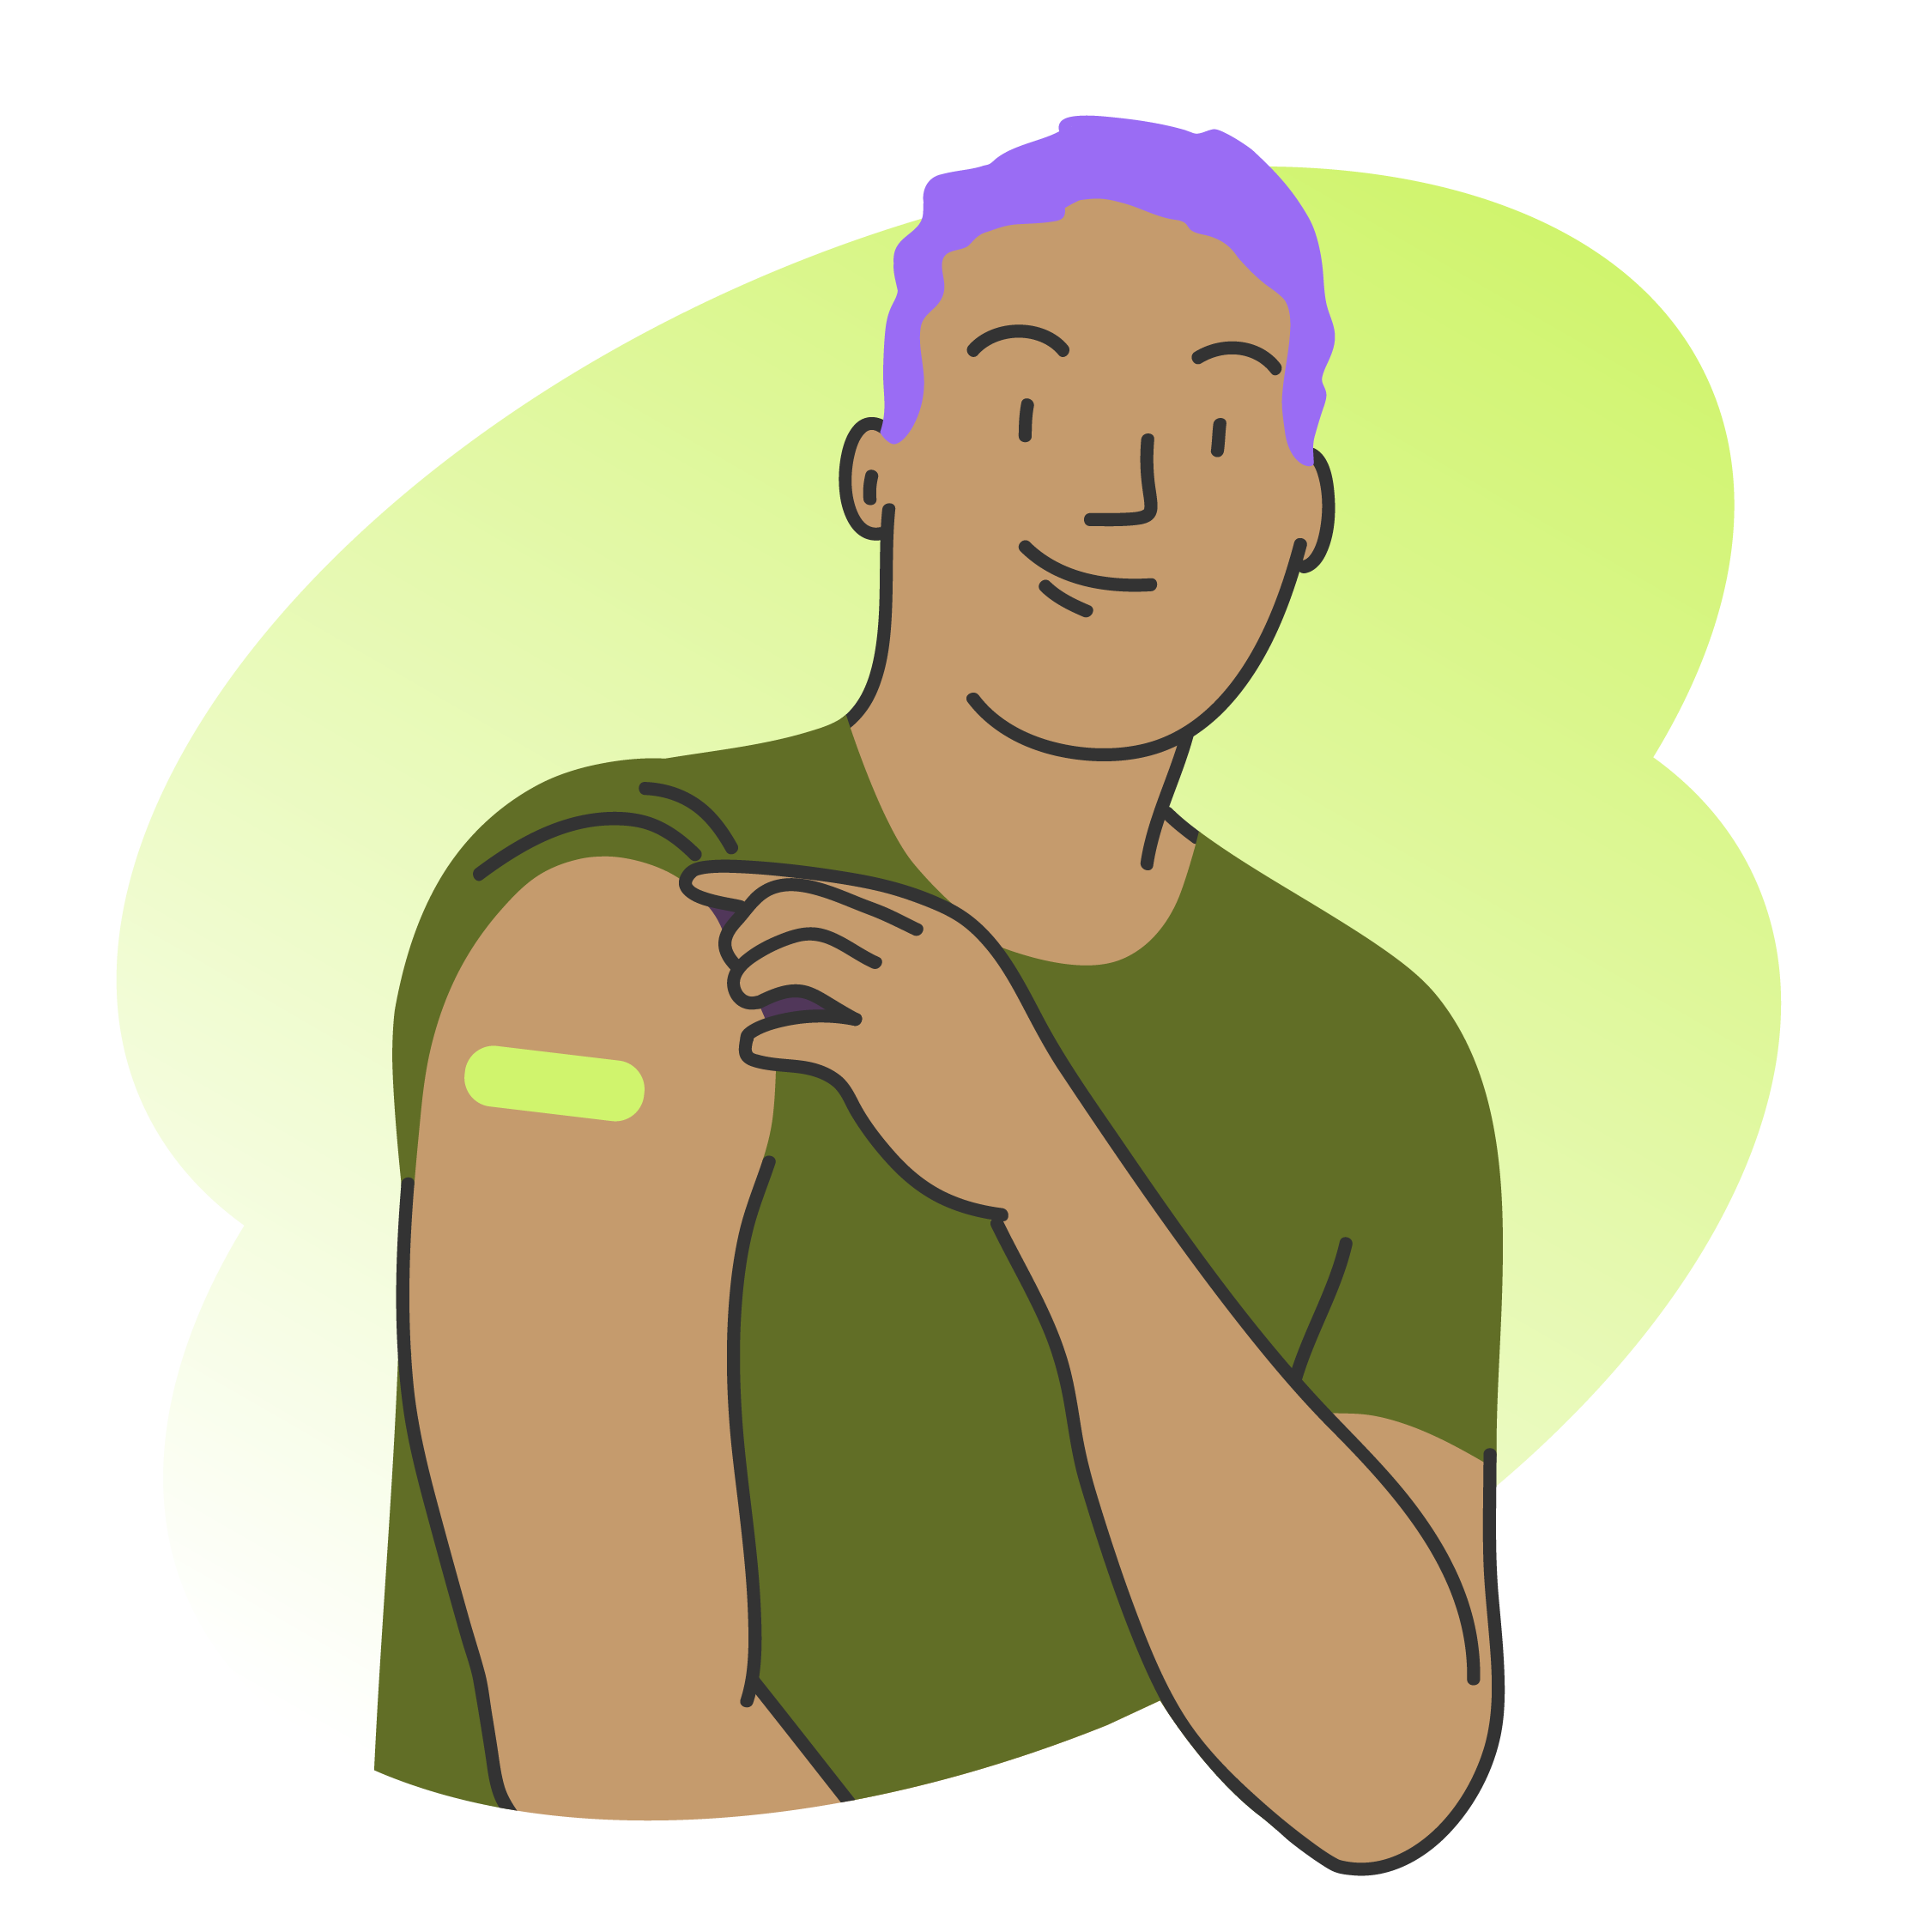 Illustration of person showing a bandage on their arm